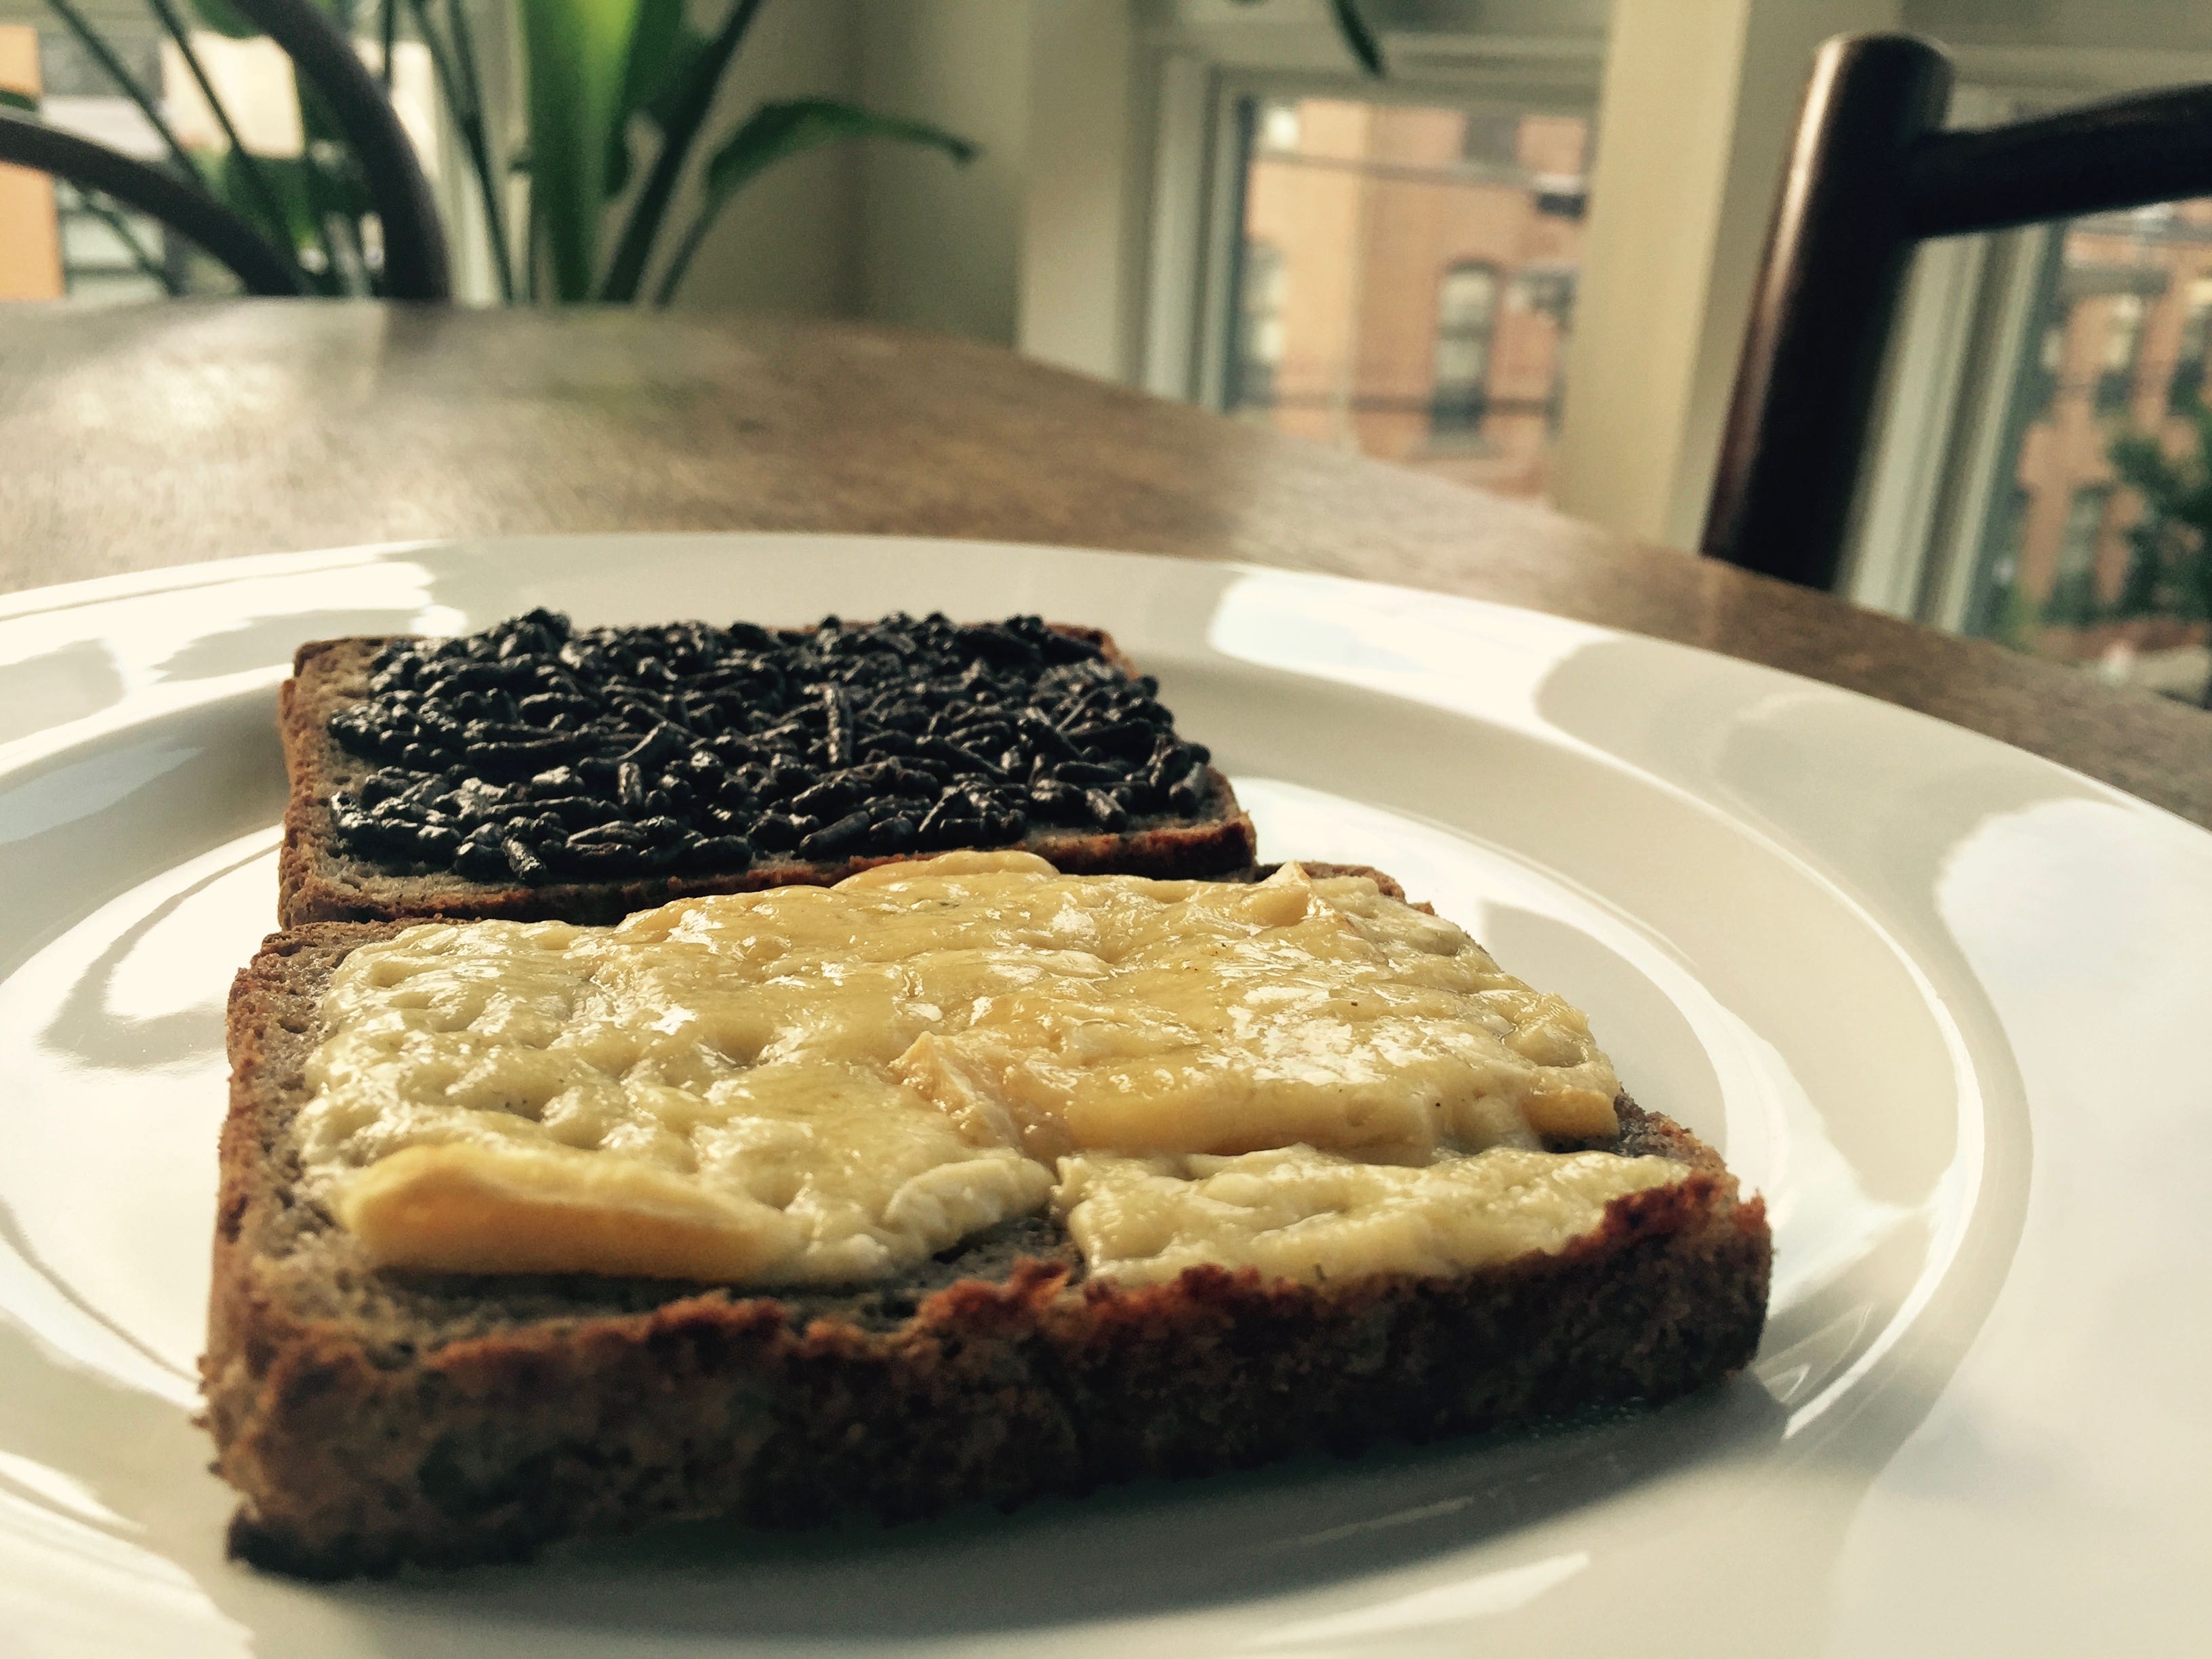 Slices of sourdough bread toasted with 1. cheese and 2. chocolate sprinkes